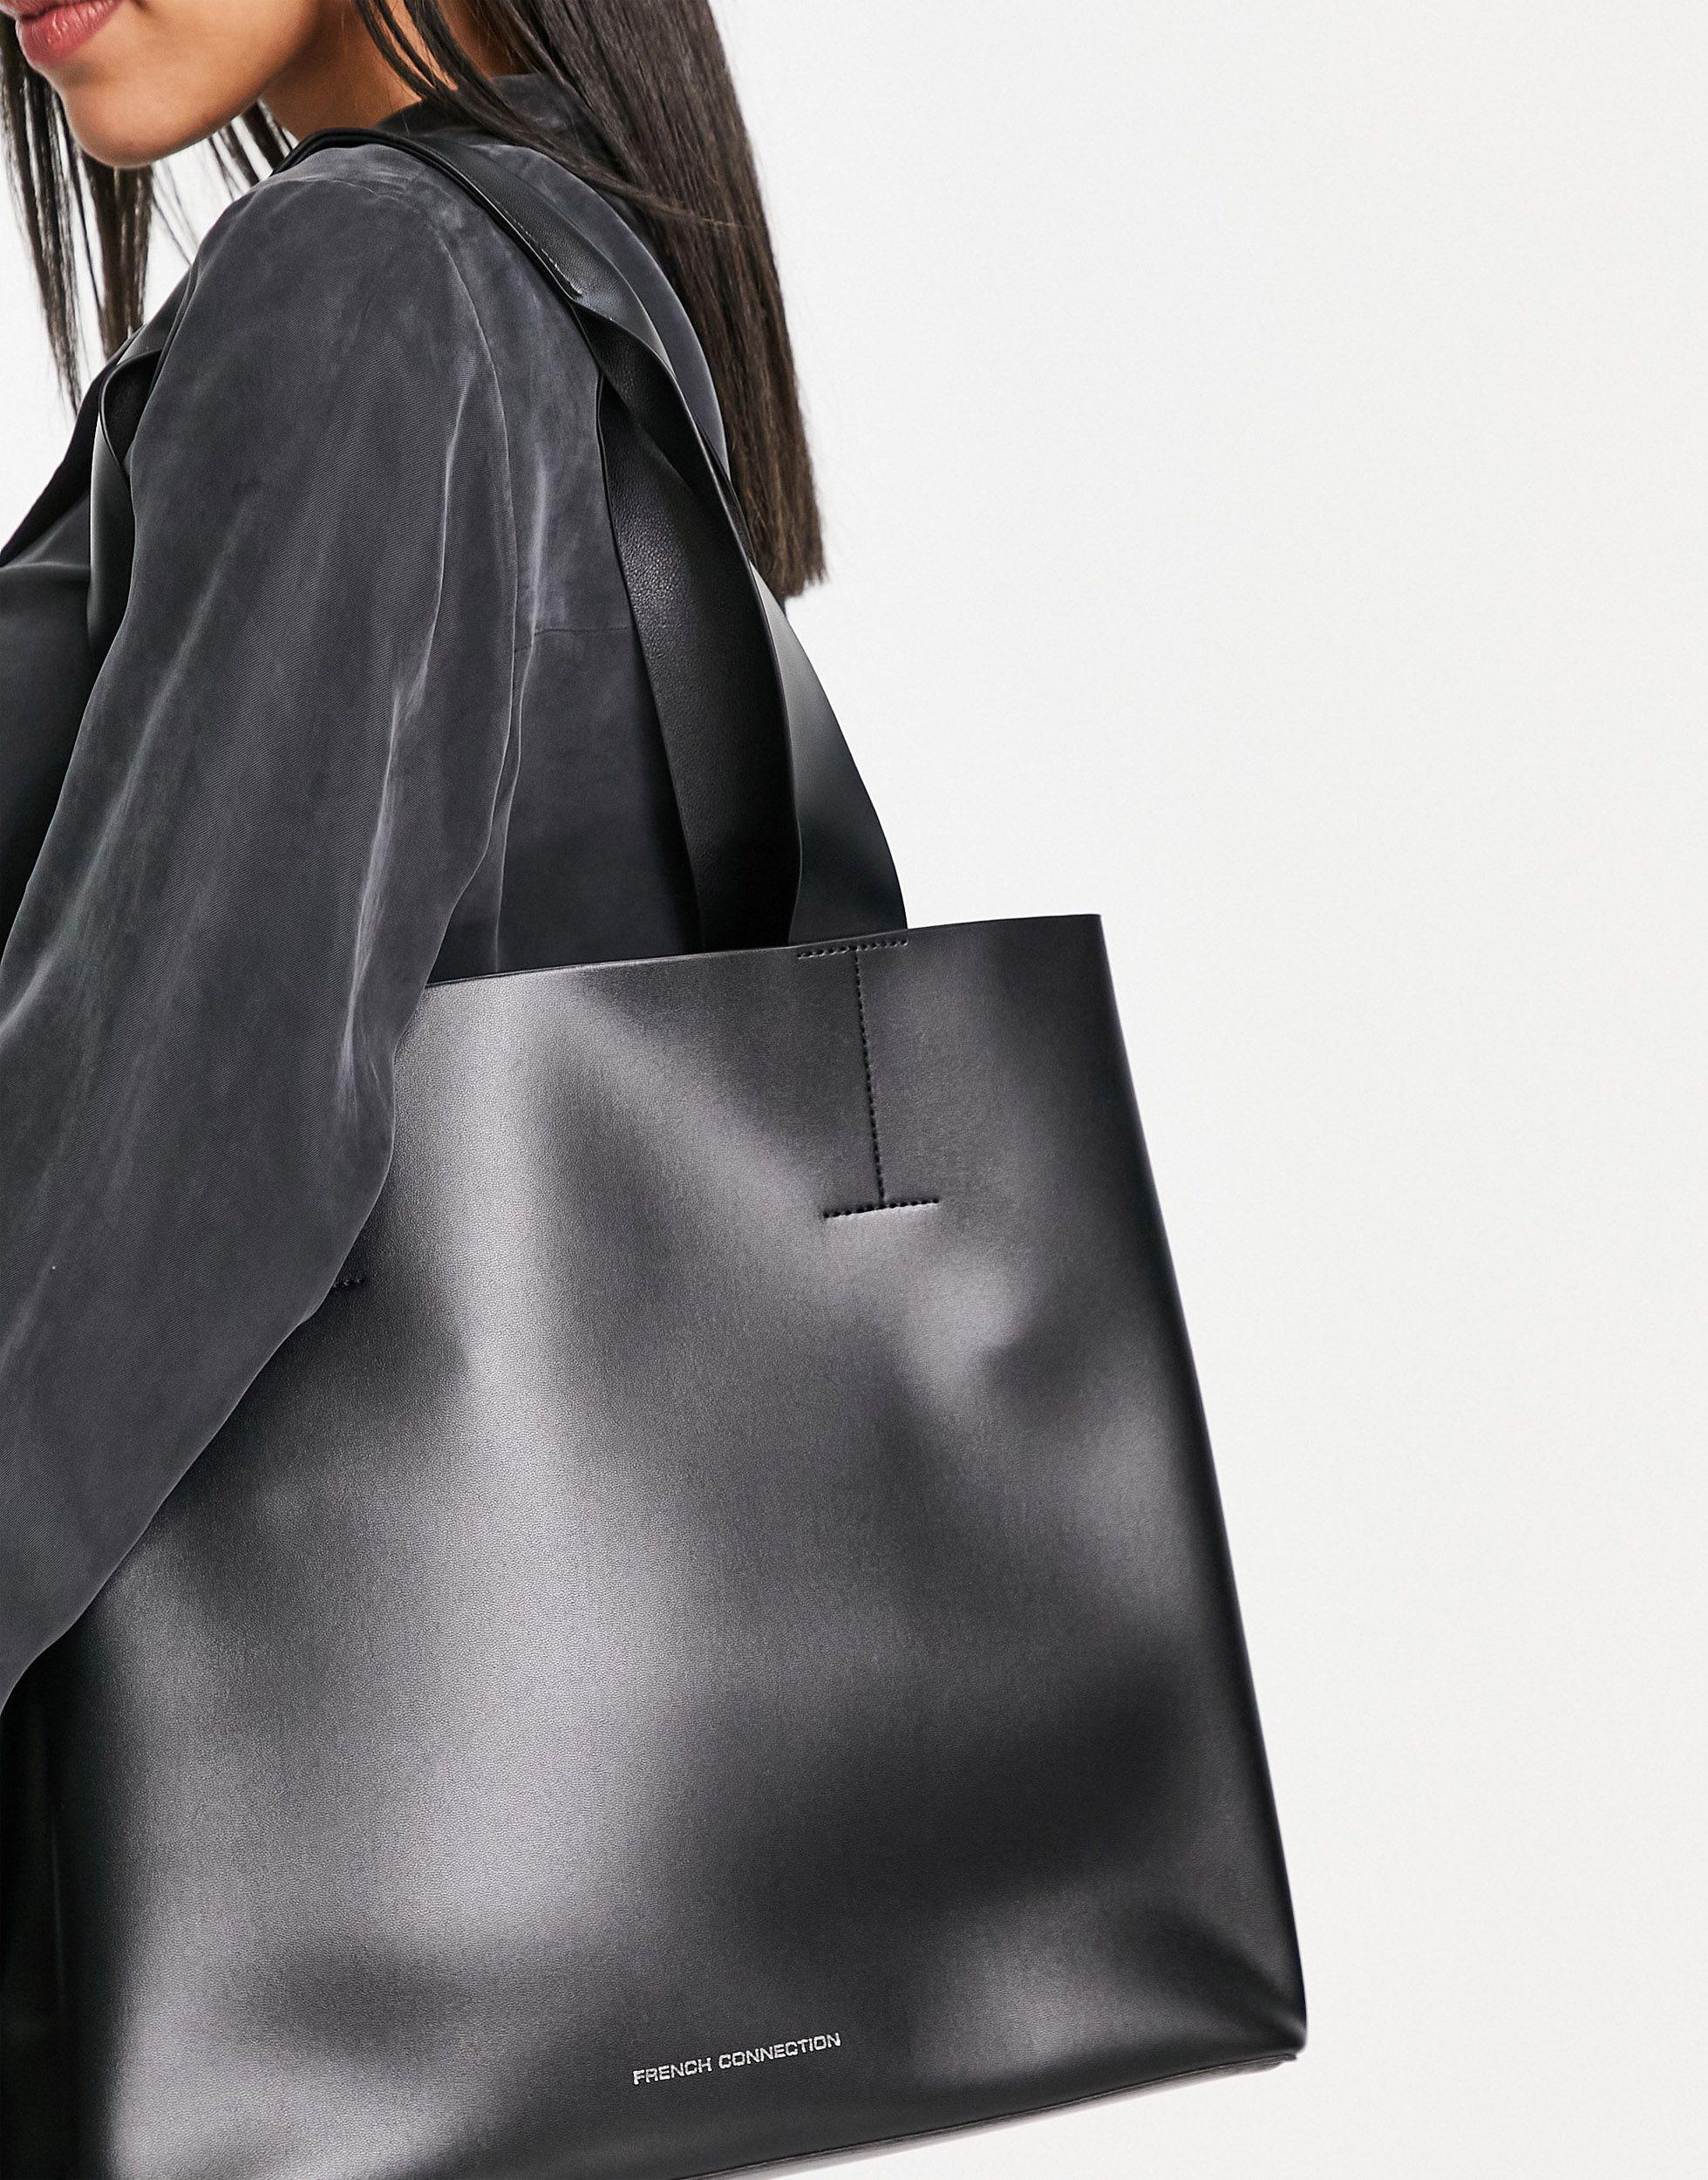 French Connection Structured Tote Bag in Black | Lyst Canada